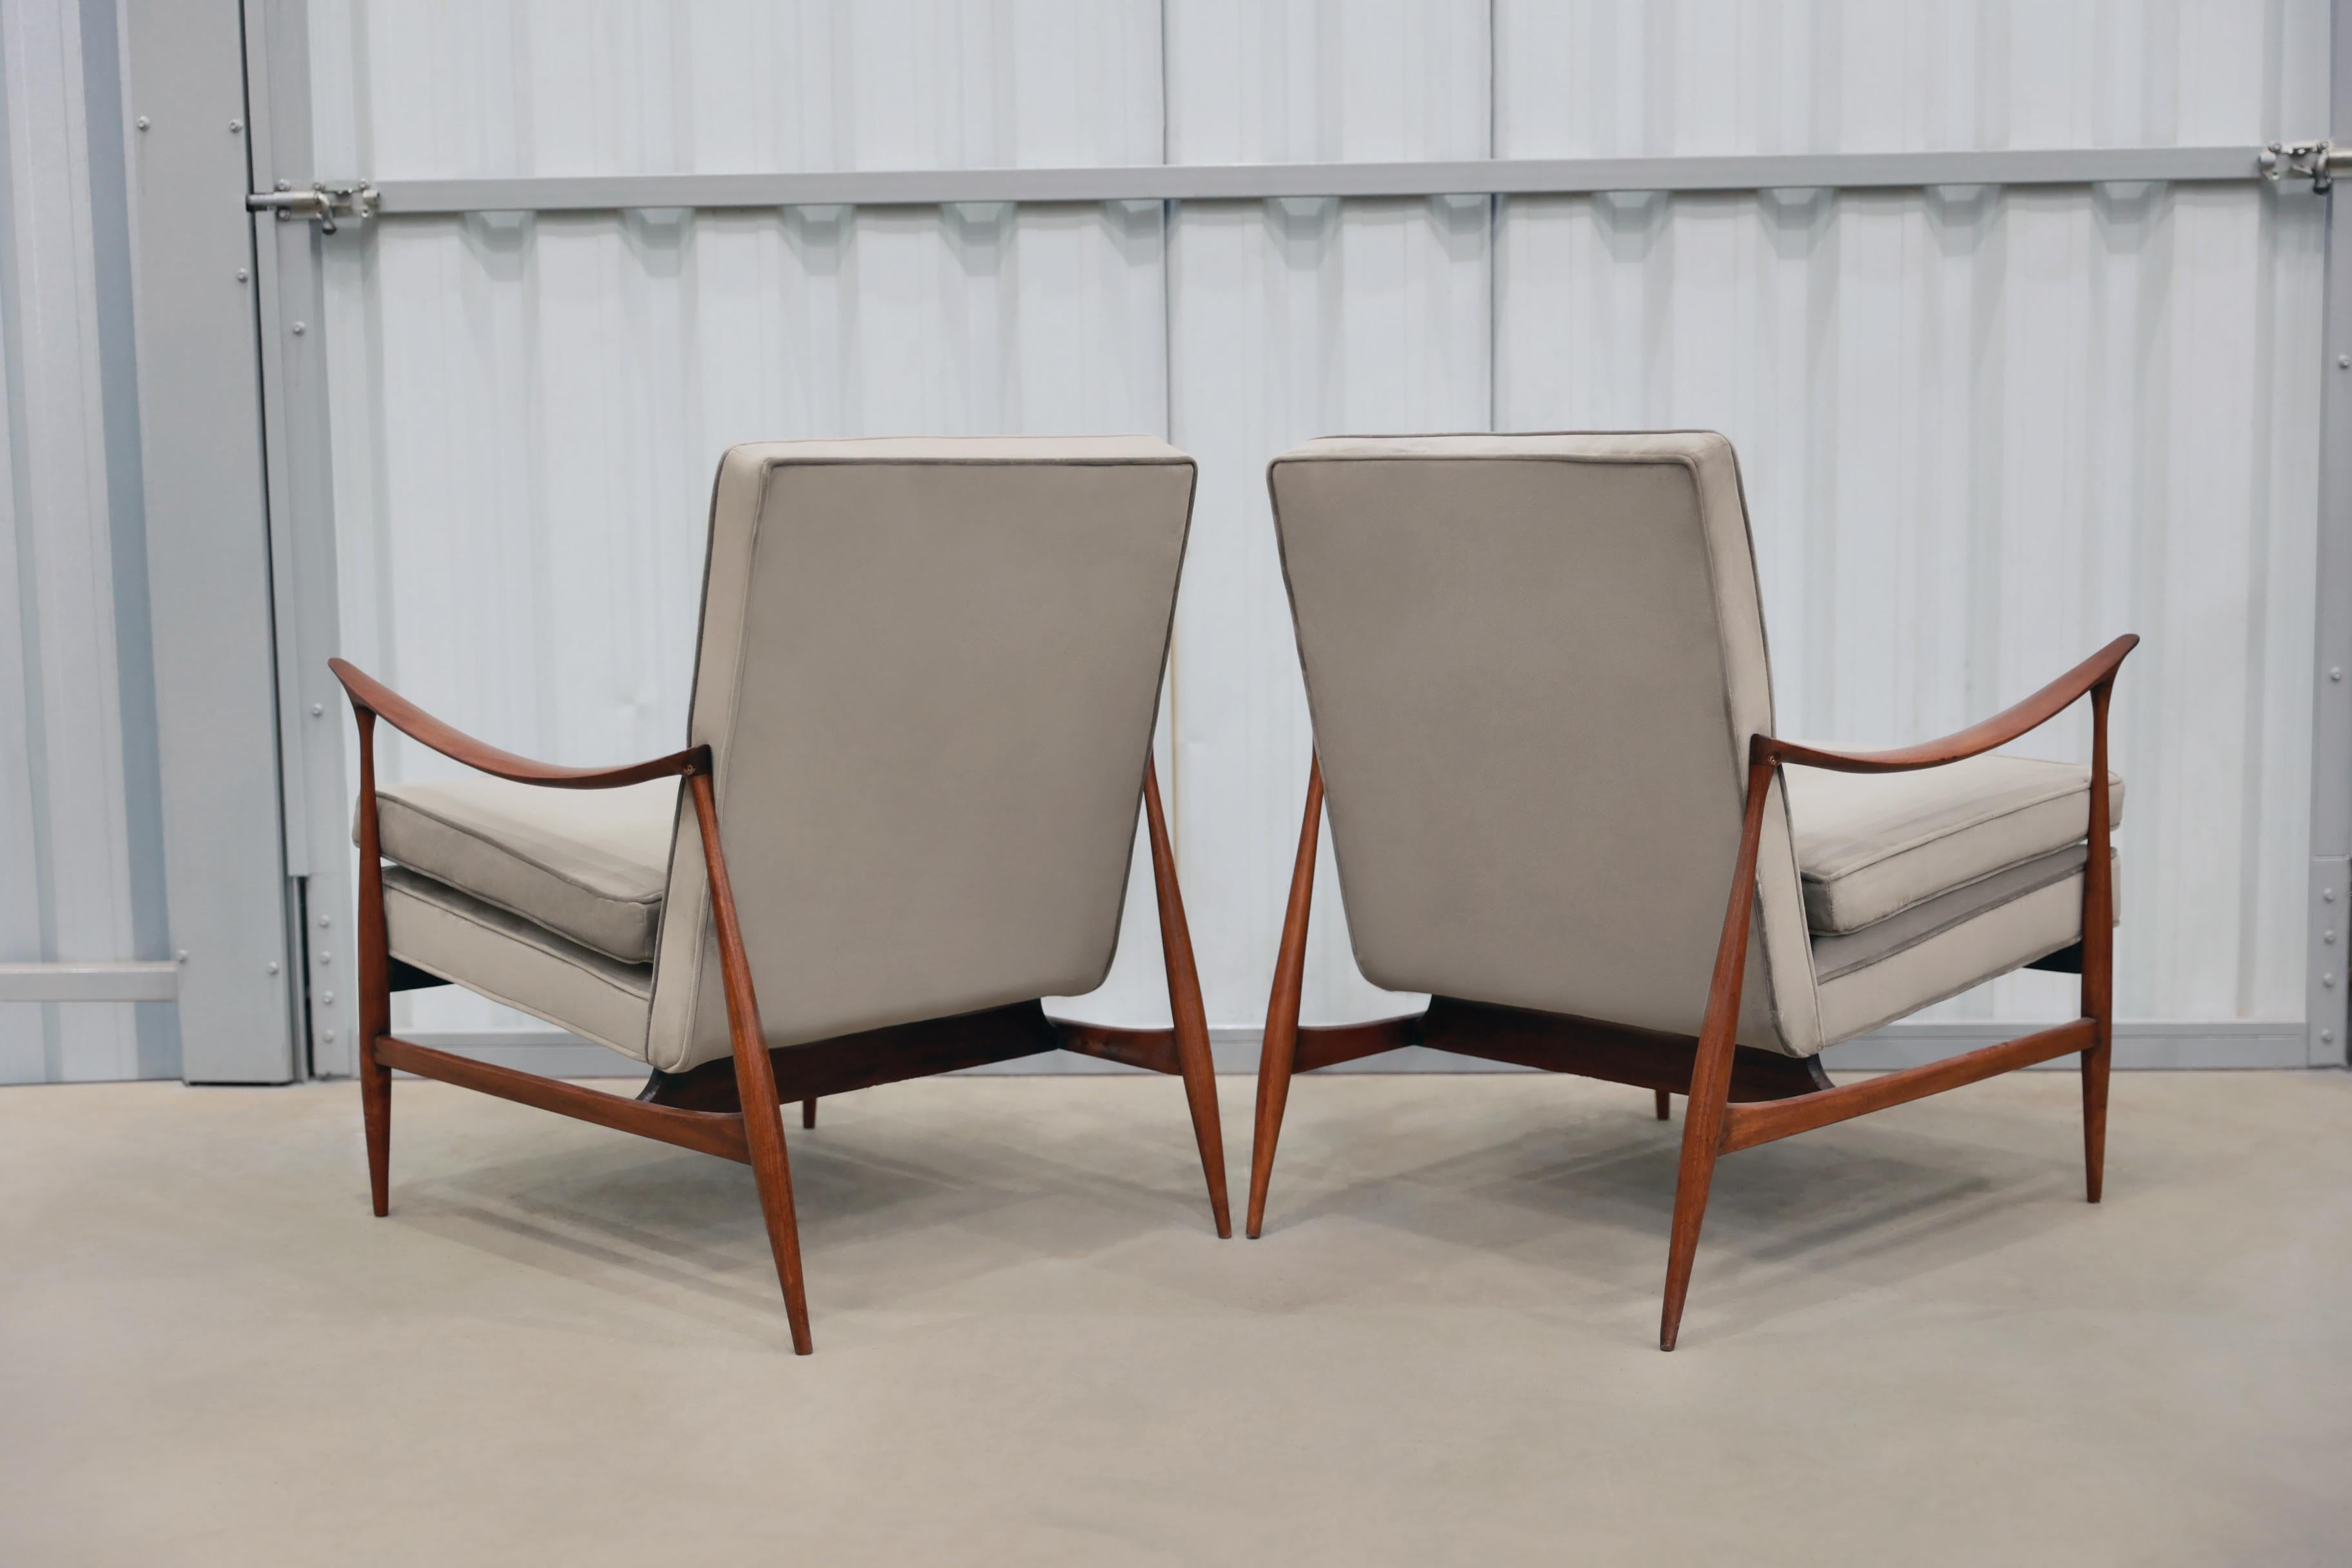 Hand-Carved Brazilian Modern Armchairs in Hardwood & Brown Fabric, Jorge Zalszupin, c. 1950s For Sale